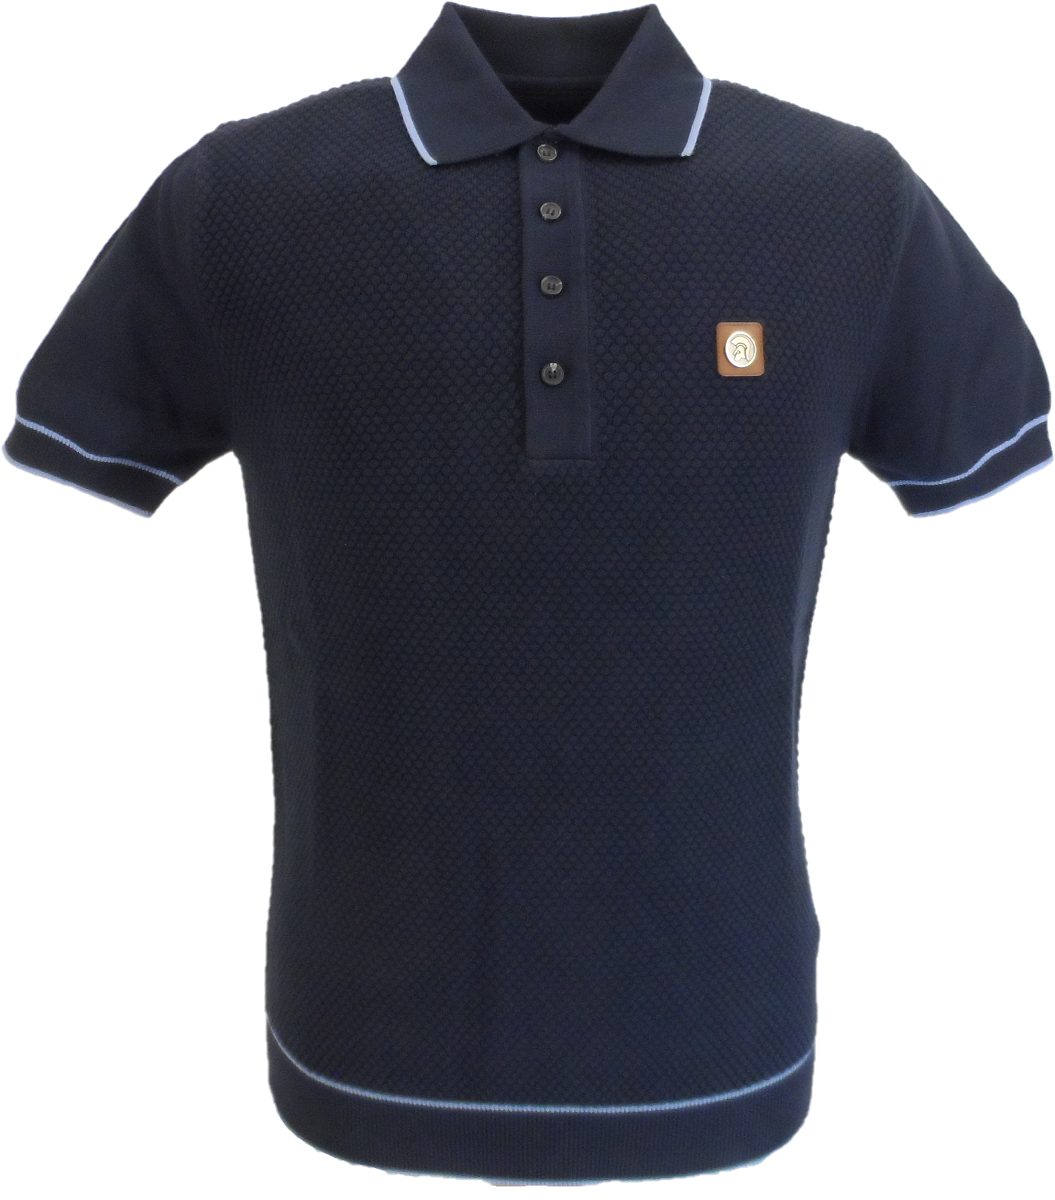 Trojan Records Mens Navy Blue Textured Knitted Polo Shirt